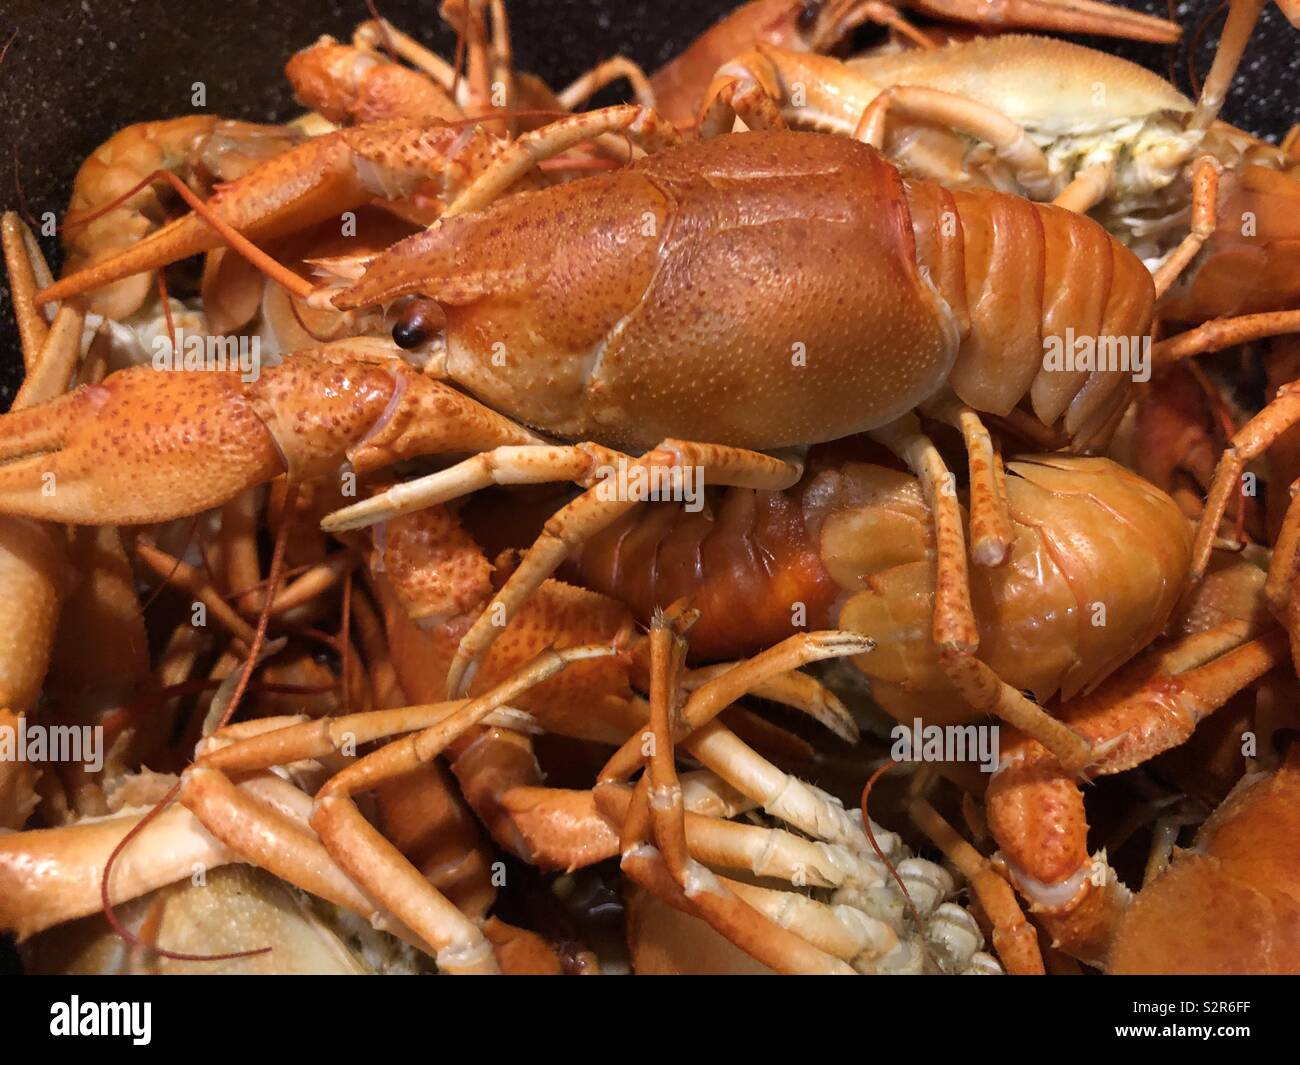 Crayfish, also known as crawfish, crawdads, freshwater lobsters, mountain lobsters, mudbugs, or yabbies are freshwater crustaceans resembling small lobsters Stock Photo